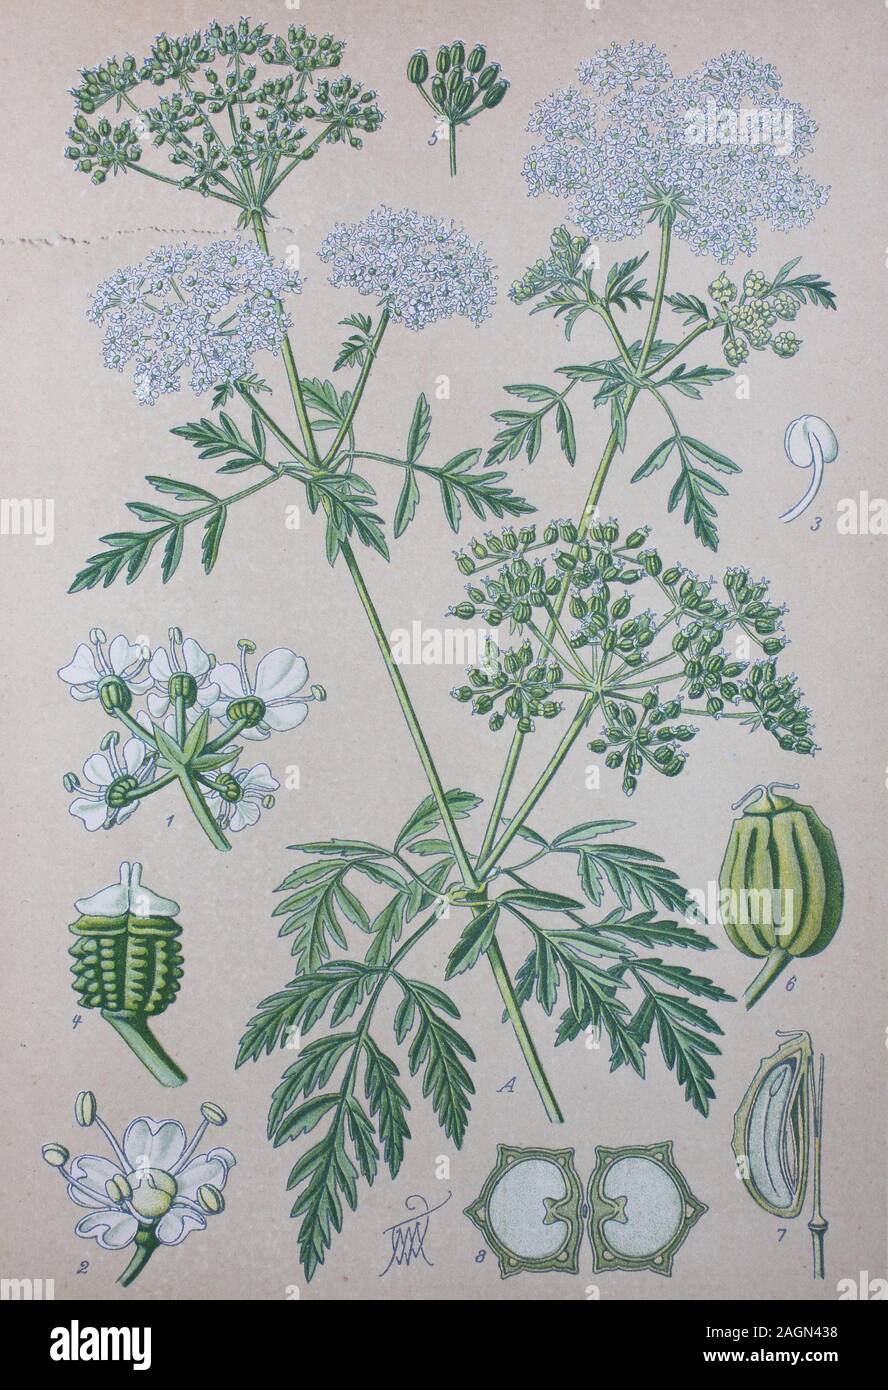 Digital improved high quality reproduction: Conium maculatum, the hemlock or poison hemlock, is a highly poisonous biennial herbaceous flowering plant in the carrot family Apiaceae  /  Gefleckte Schierling, Pflanzenart aus der Familie der Doldenblütler Stock Photo